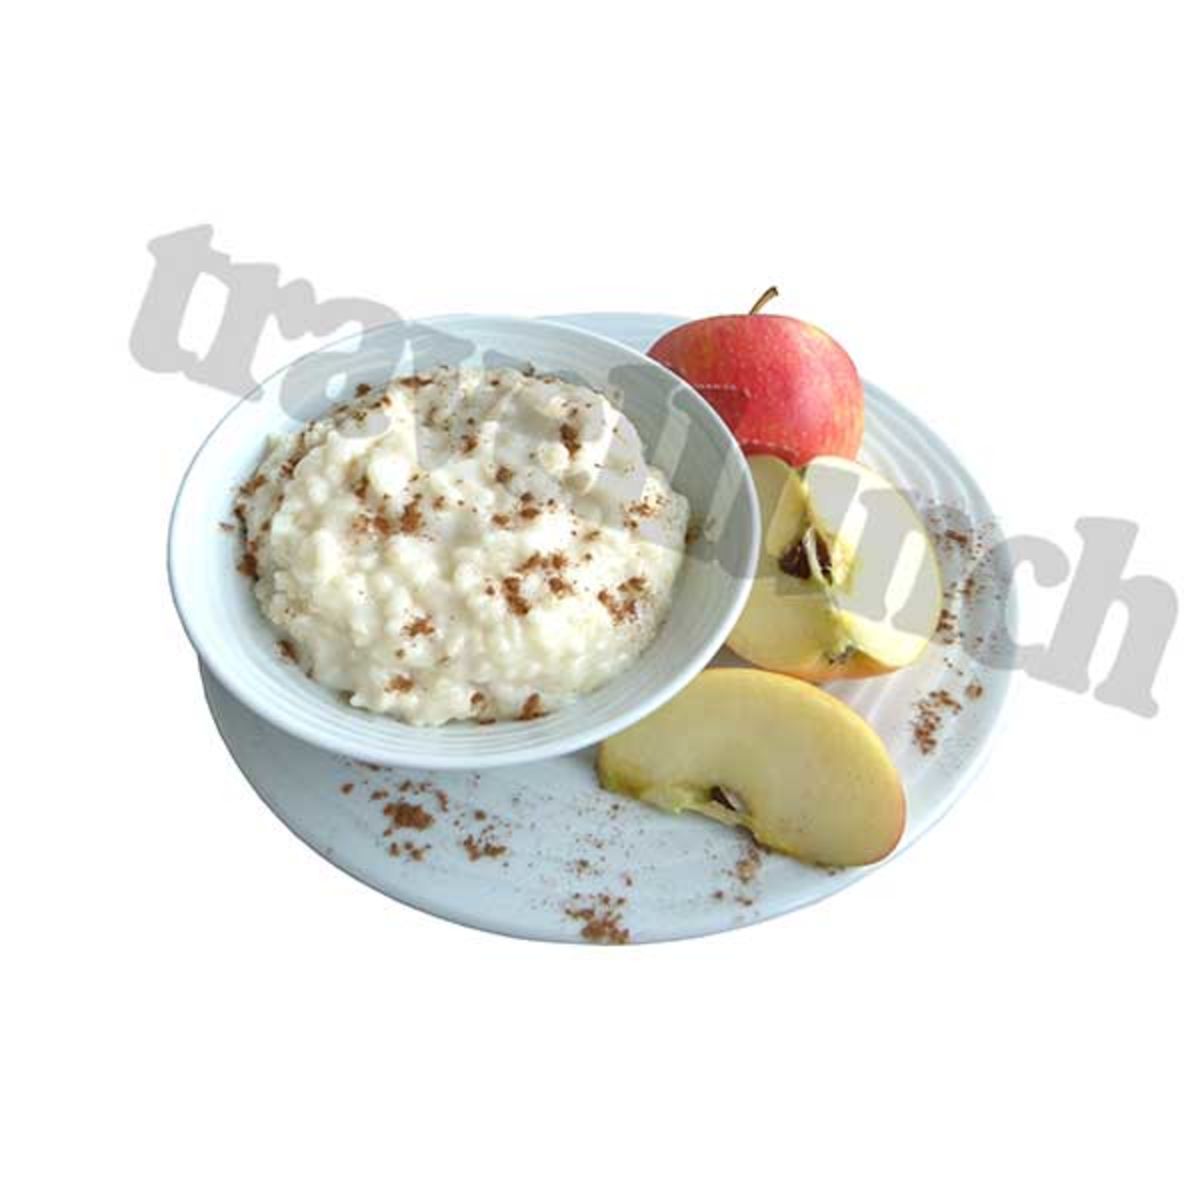 Rice pudding with apples and cinnamon